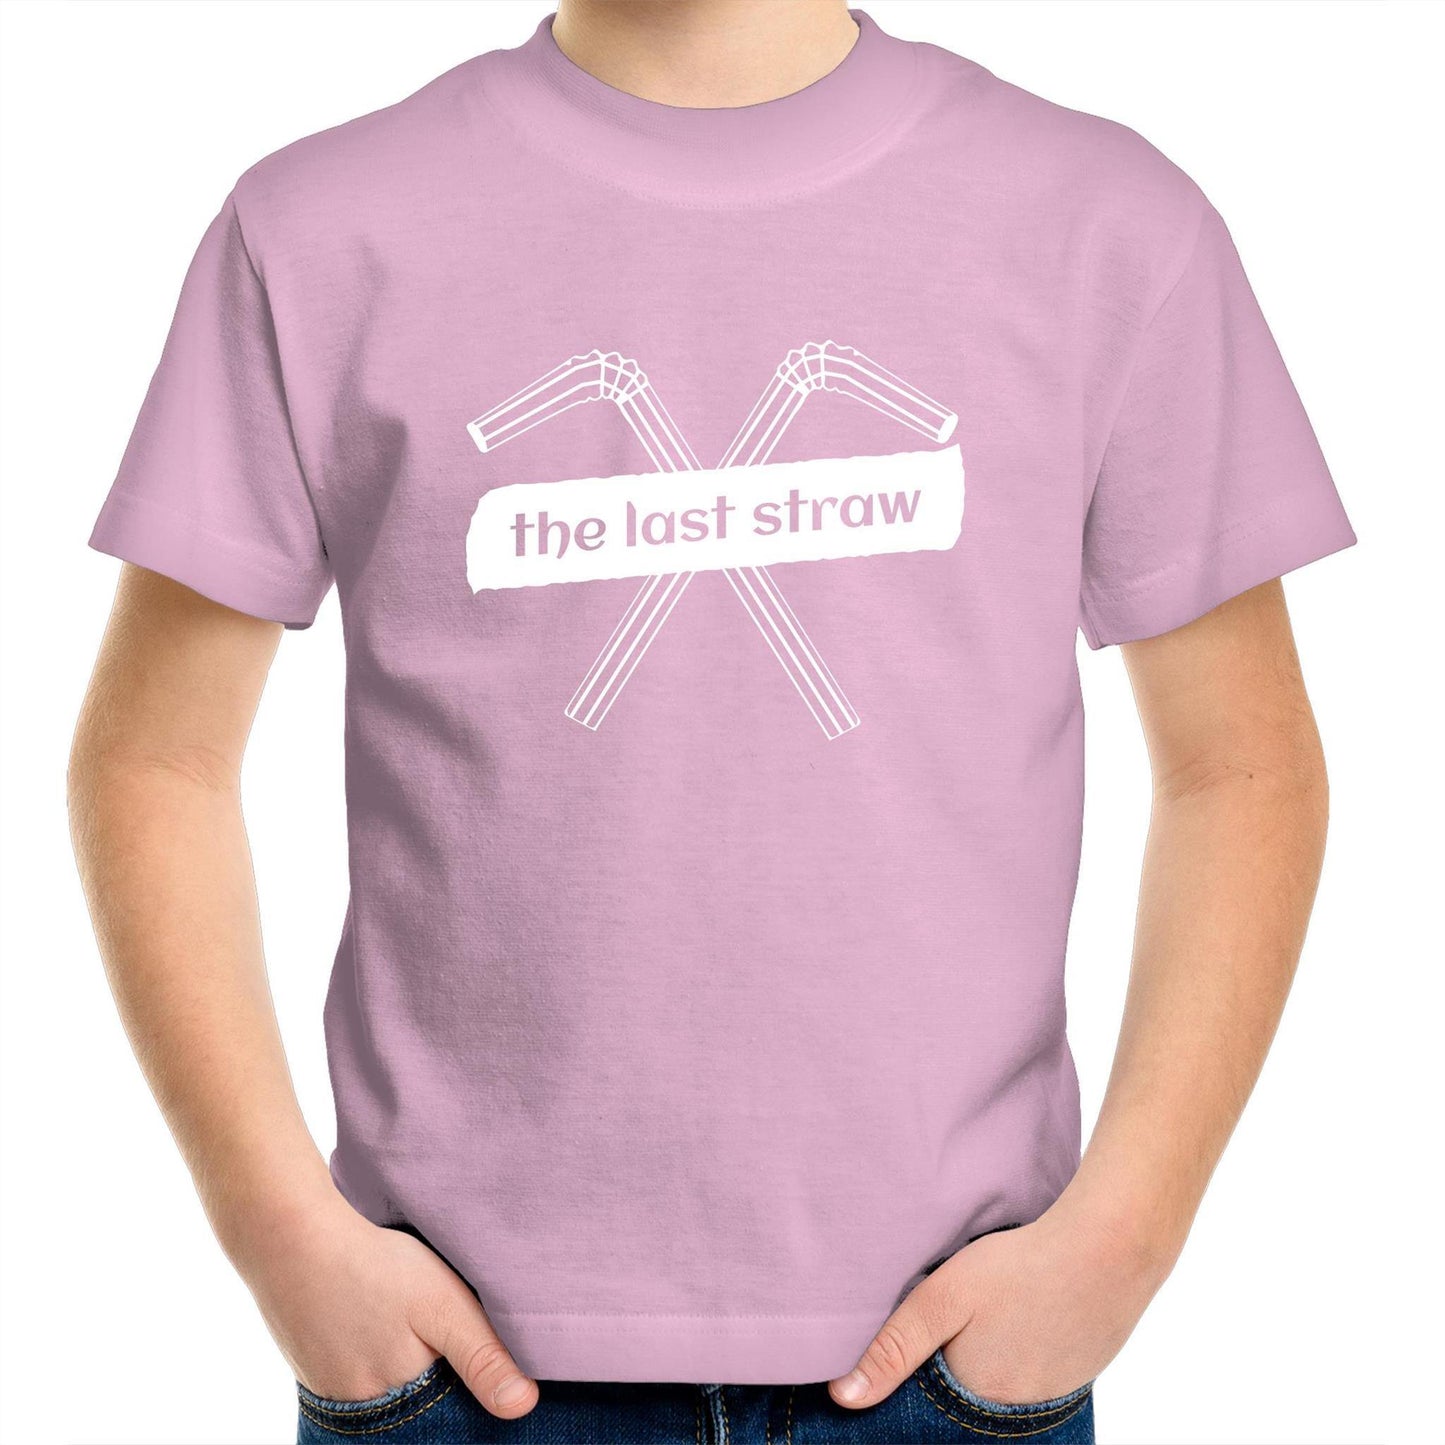 The Last Straw - Kids Youth Crew T-Shirt Pink Kids Youth T-shirt Environment